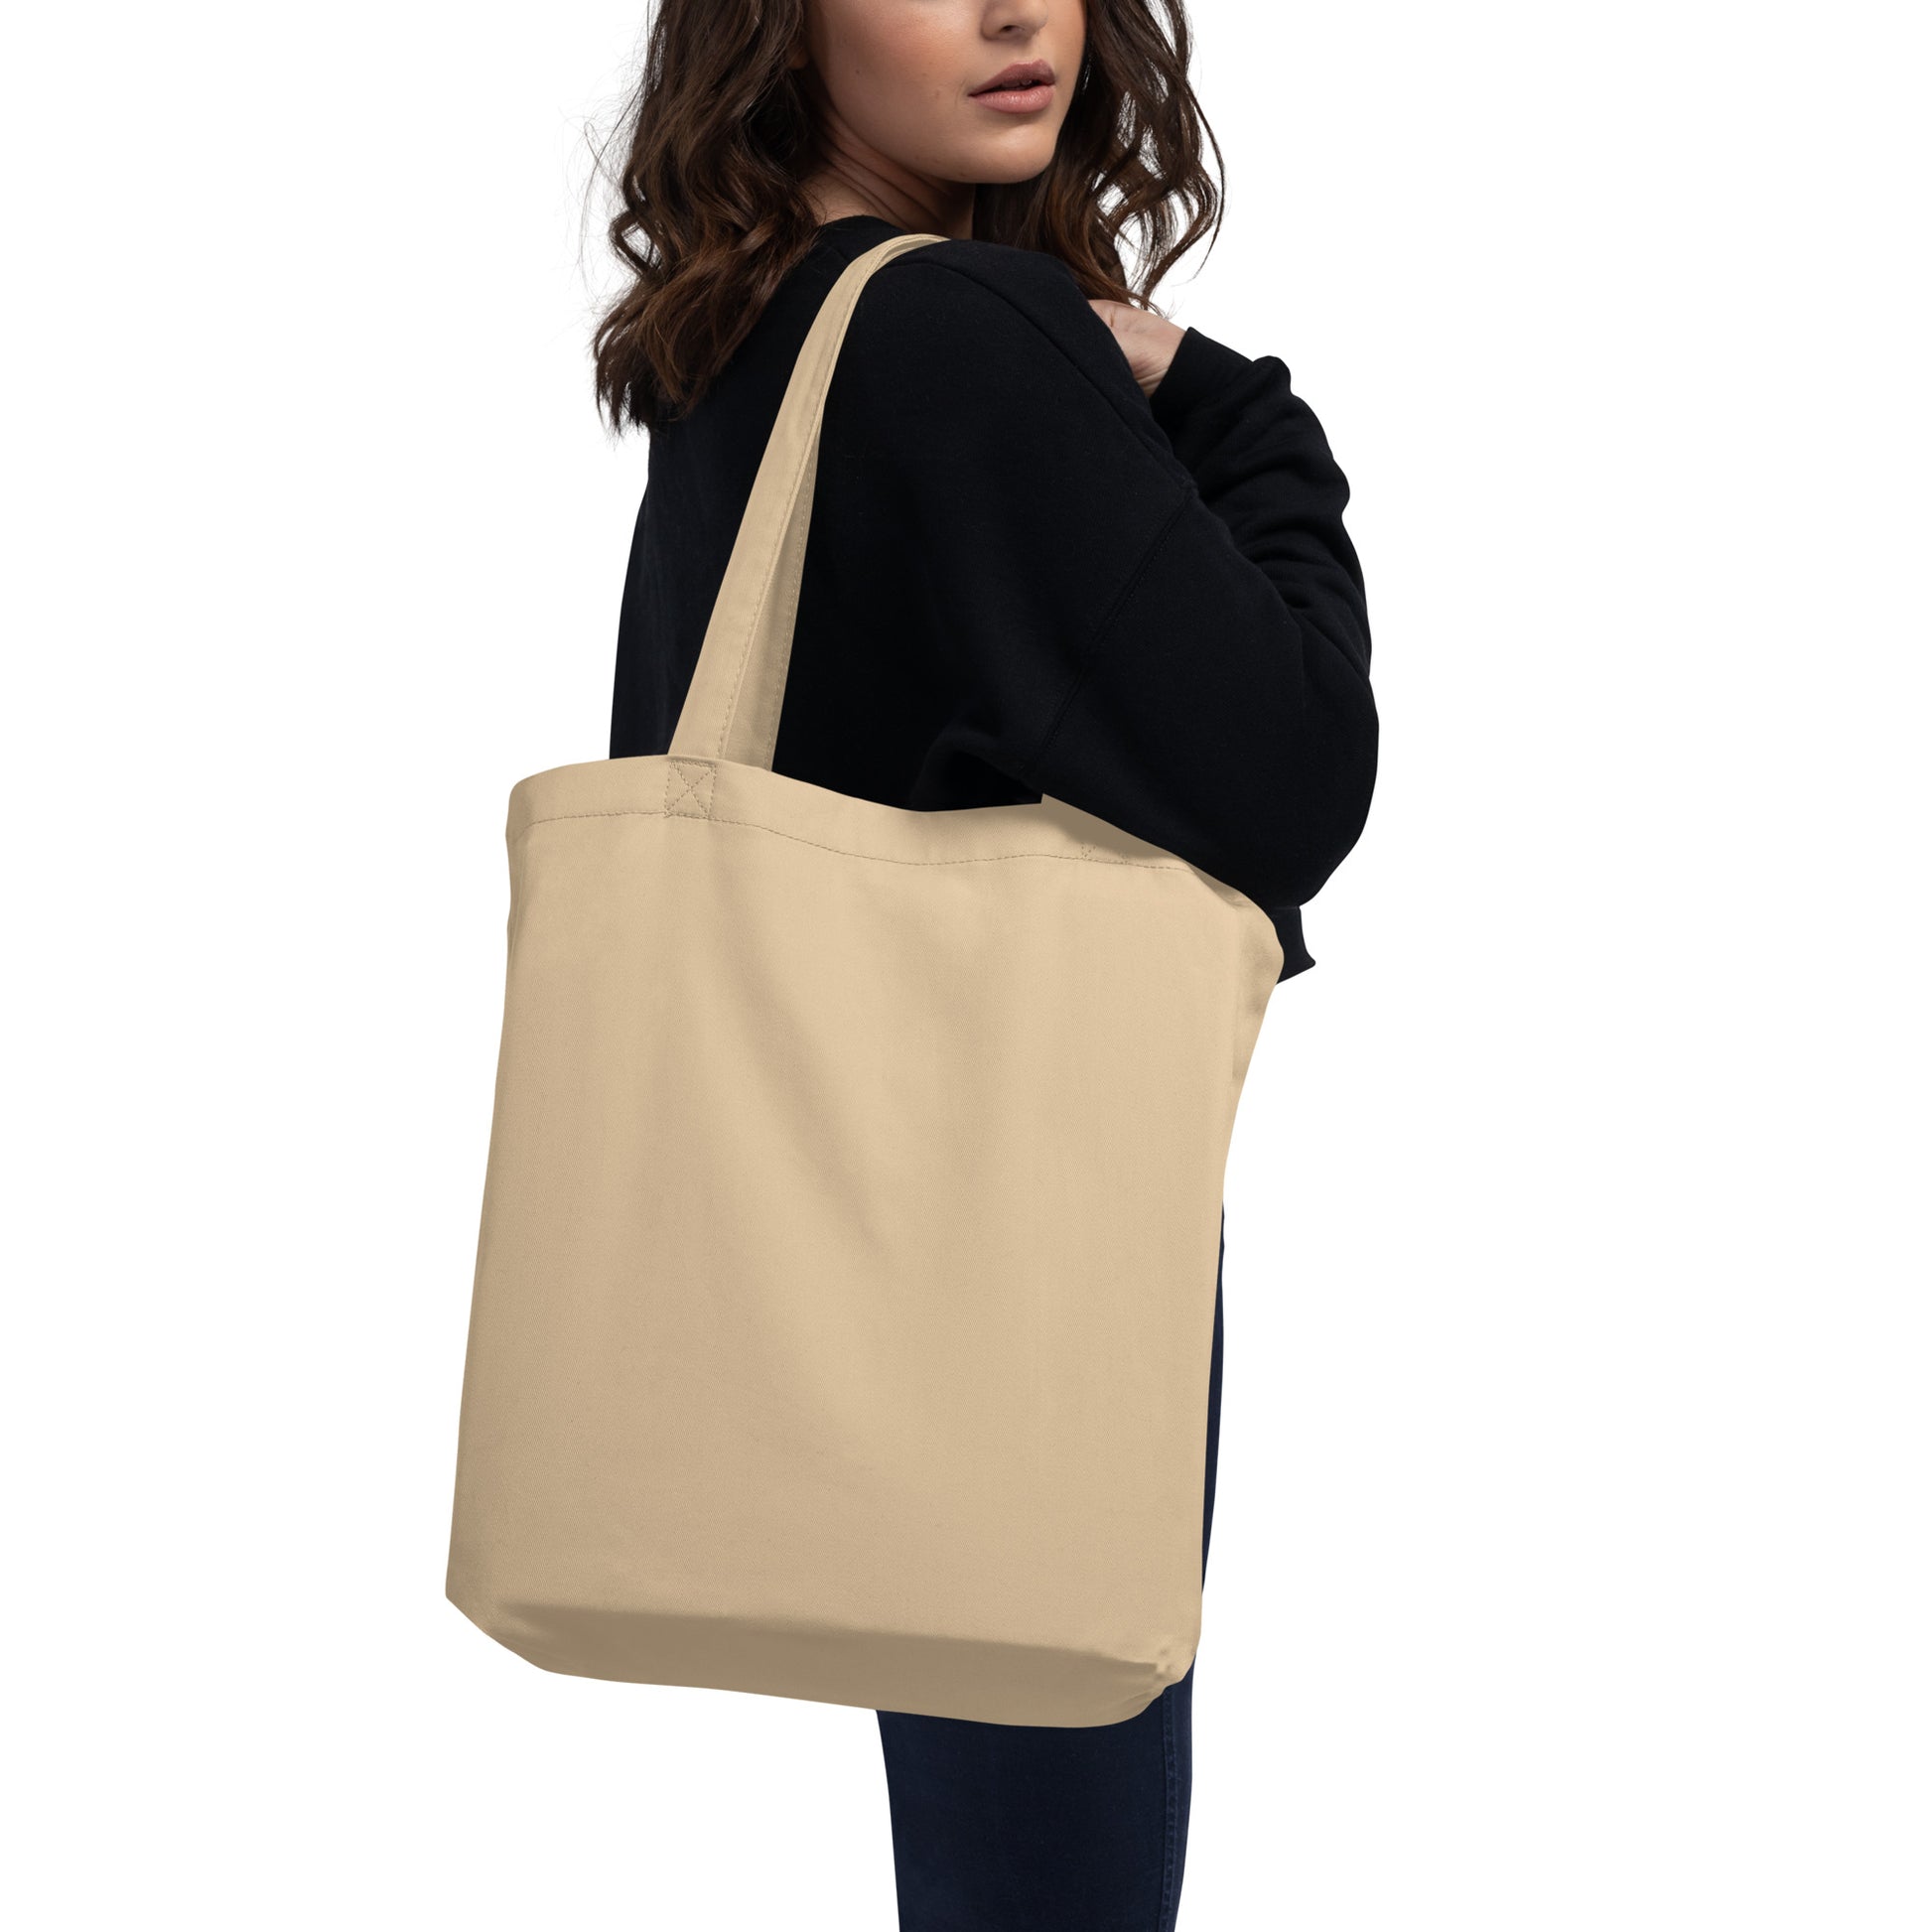 Aviation Gift Organic Tote - Black • FLL Fort Lauderdale • YHM Designs - Image 06